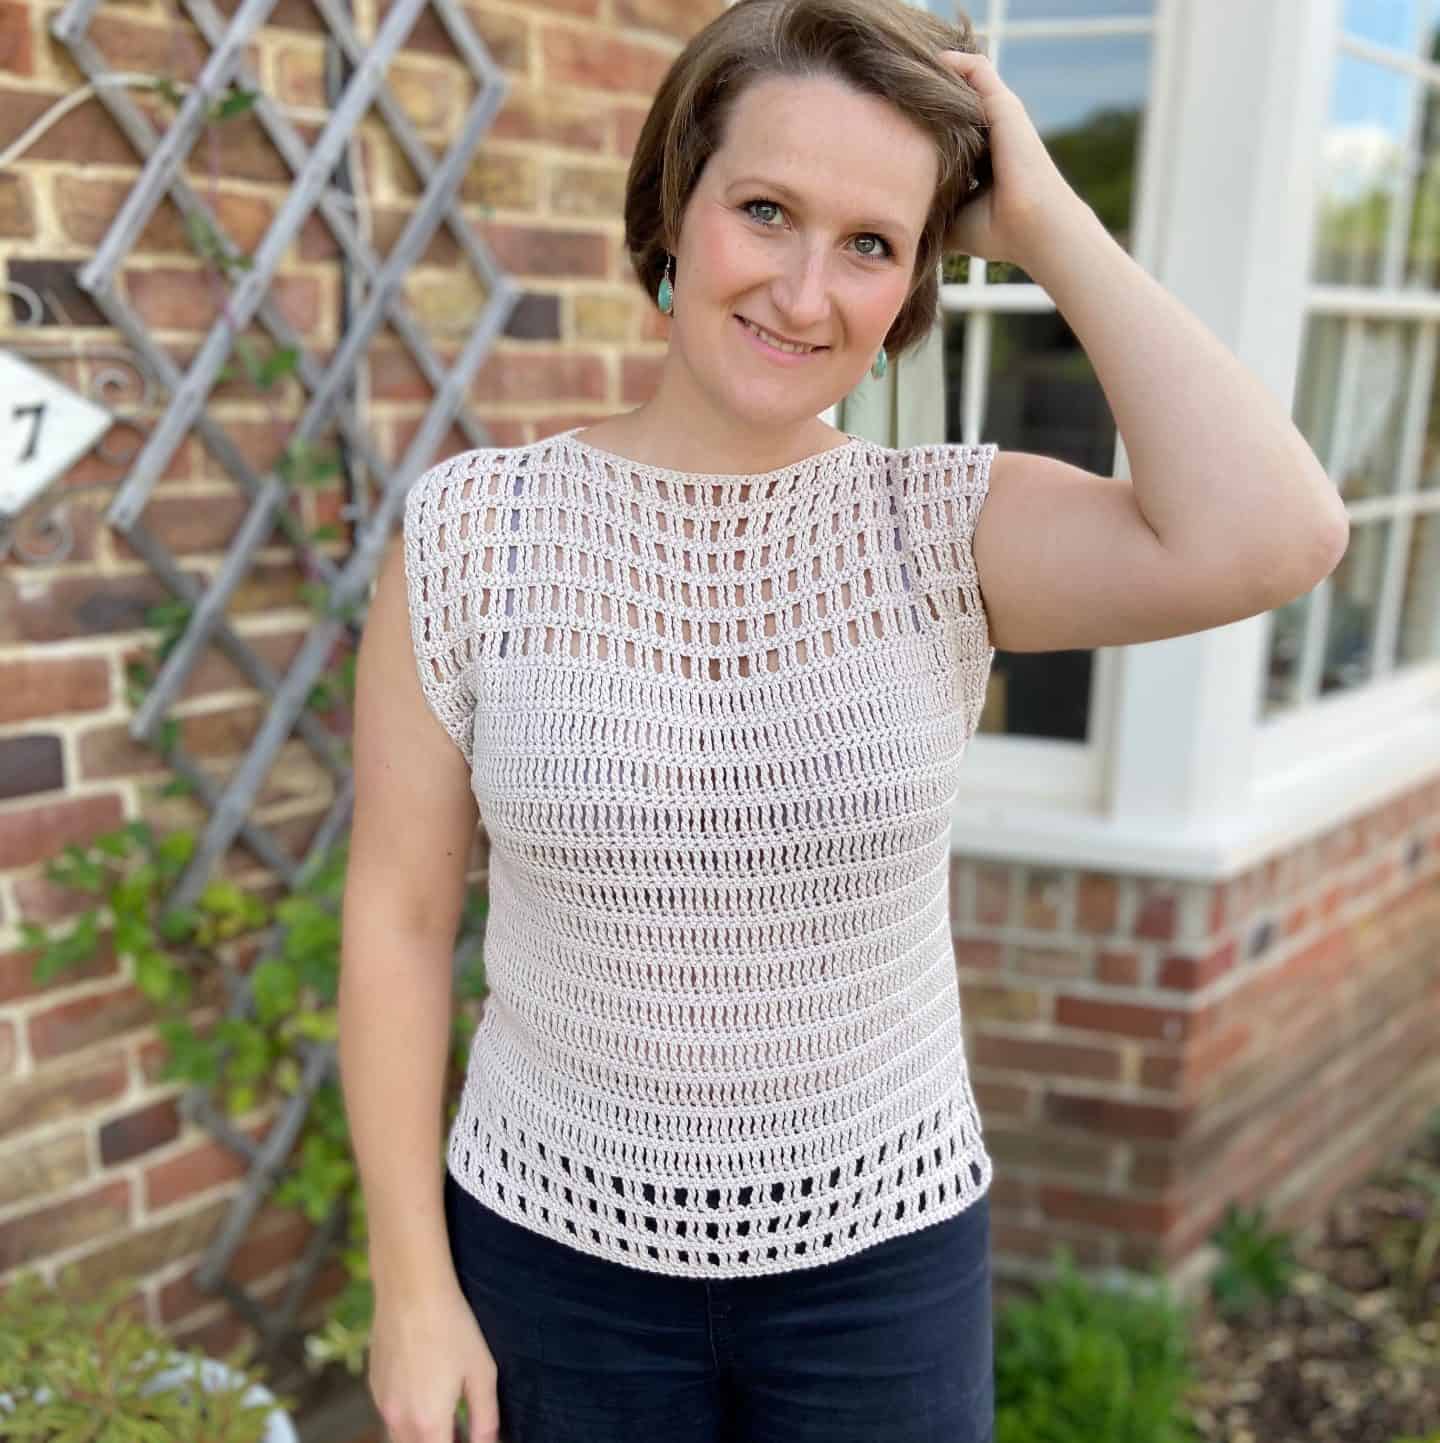 Quick and Easy Crochet Top Pattern - The Eyelet Lace Tee - HanJan Crochet